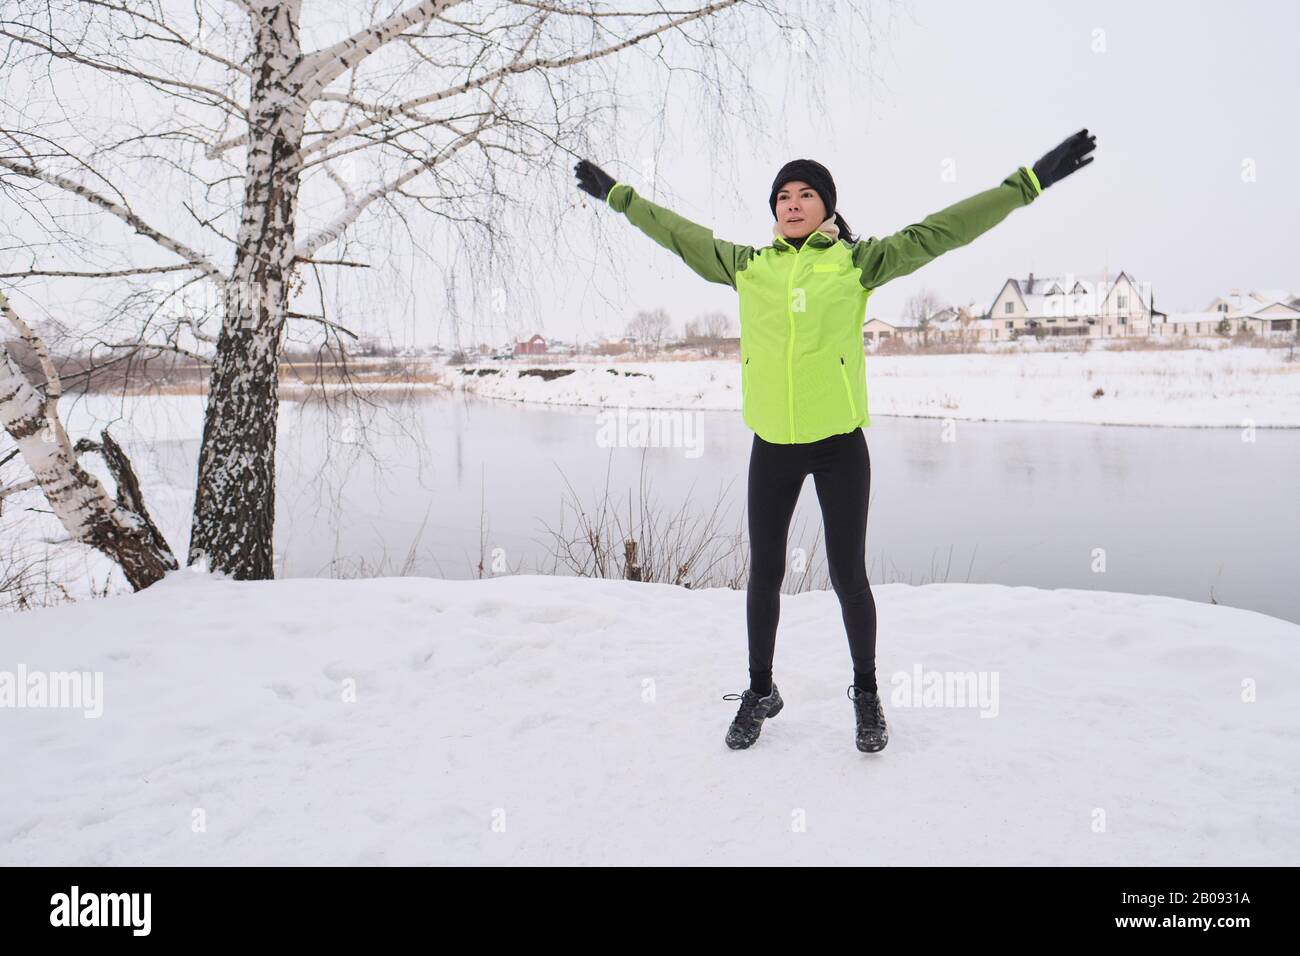 Active young woman in sportswear doing jumping exercise with raised arms at winter lake Stock Photo